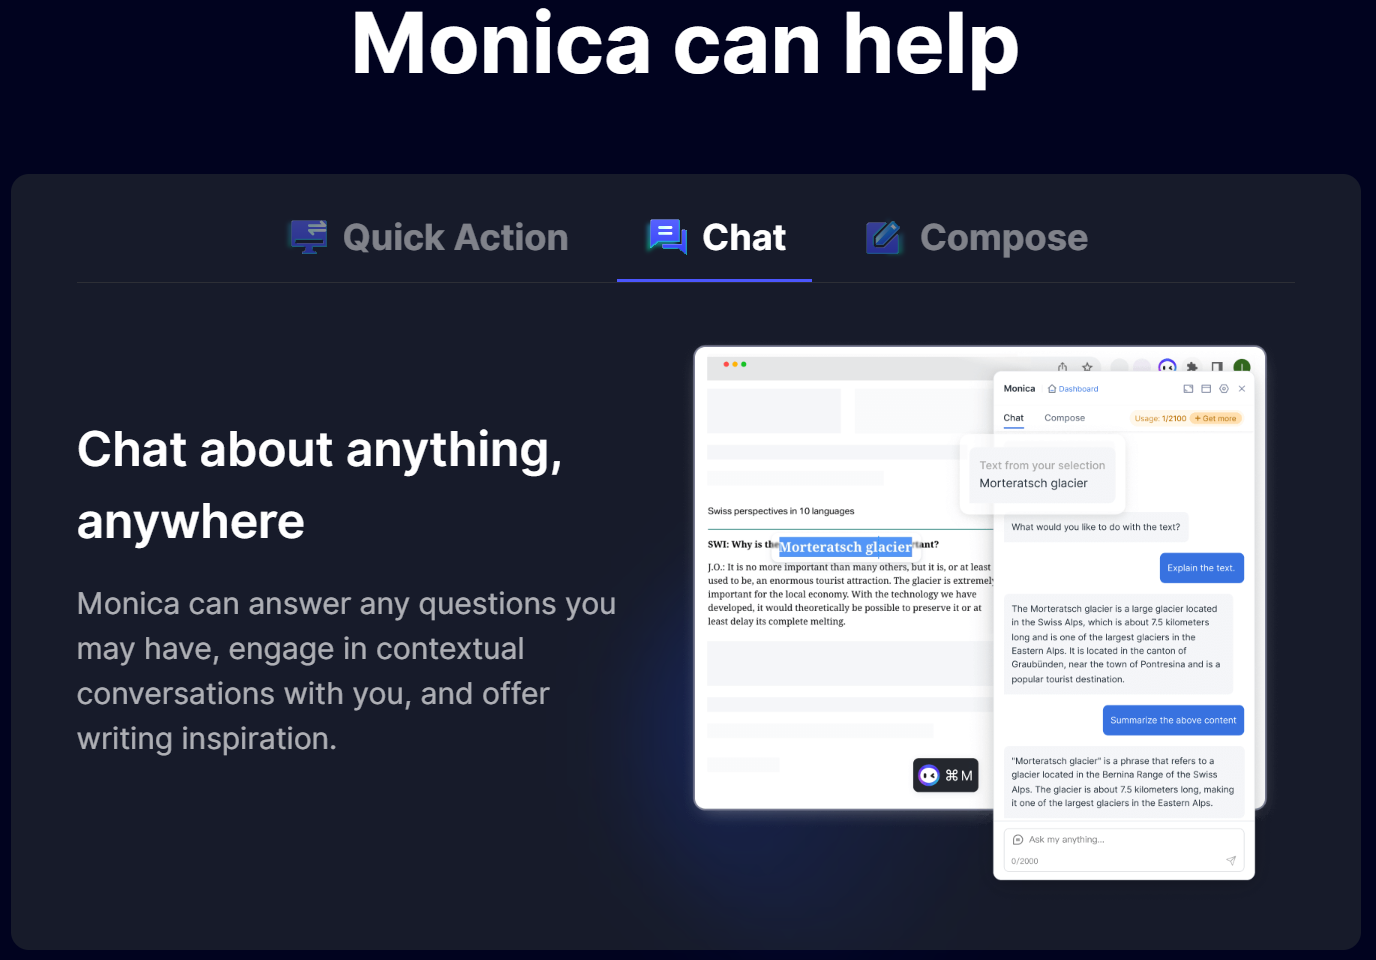 This is a screenshot showing the many ways Monica can assist you